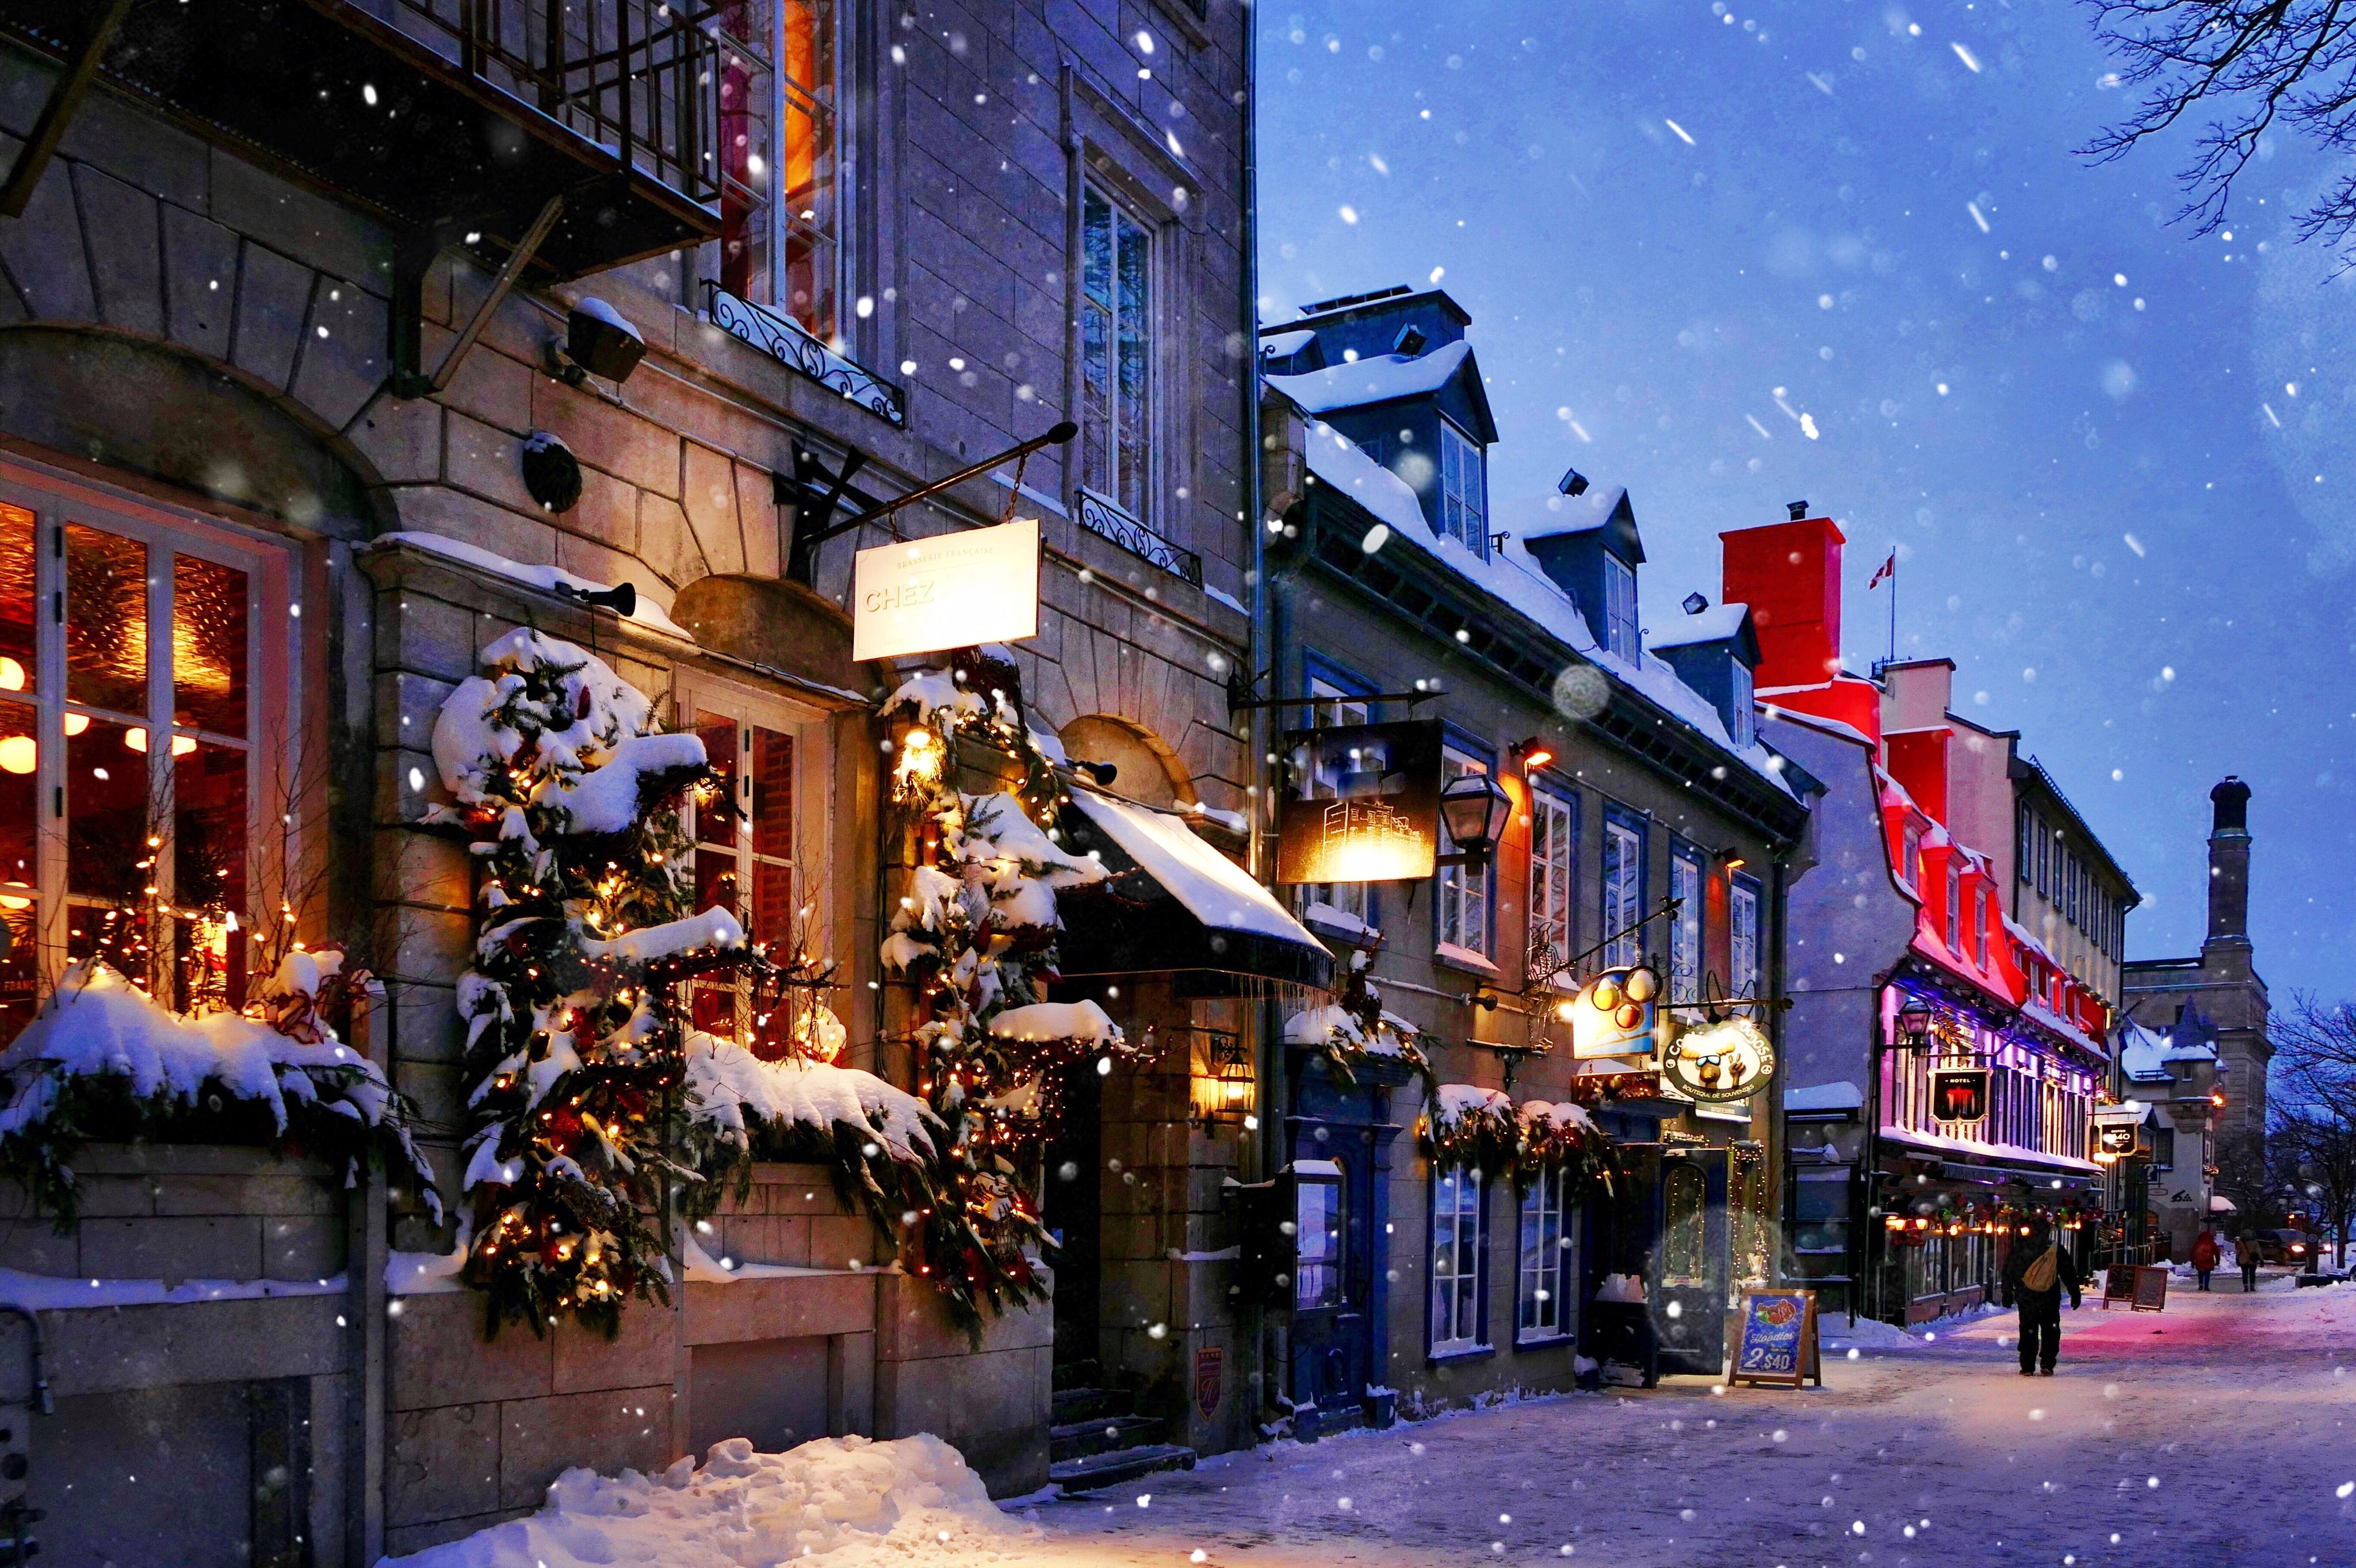 30 Best Christmas Villages and Towns In the World 2021